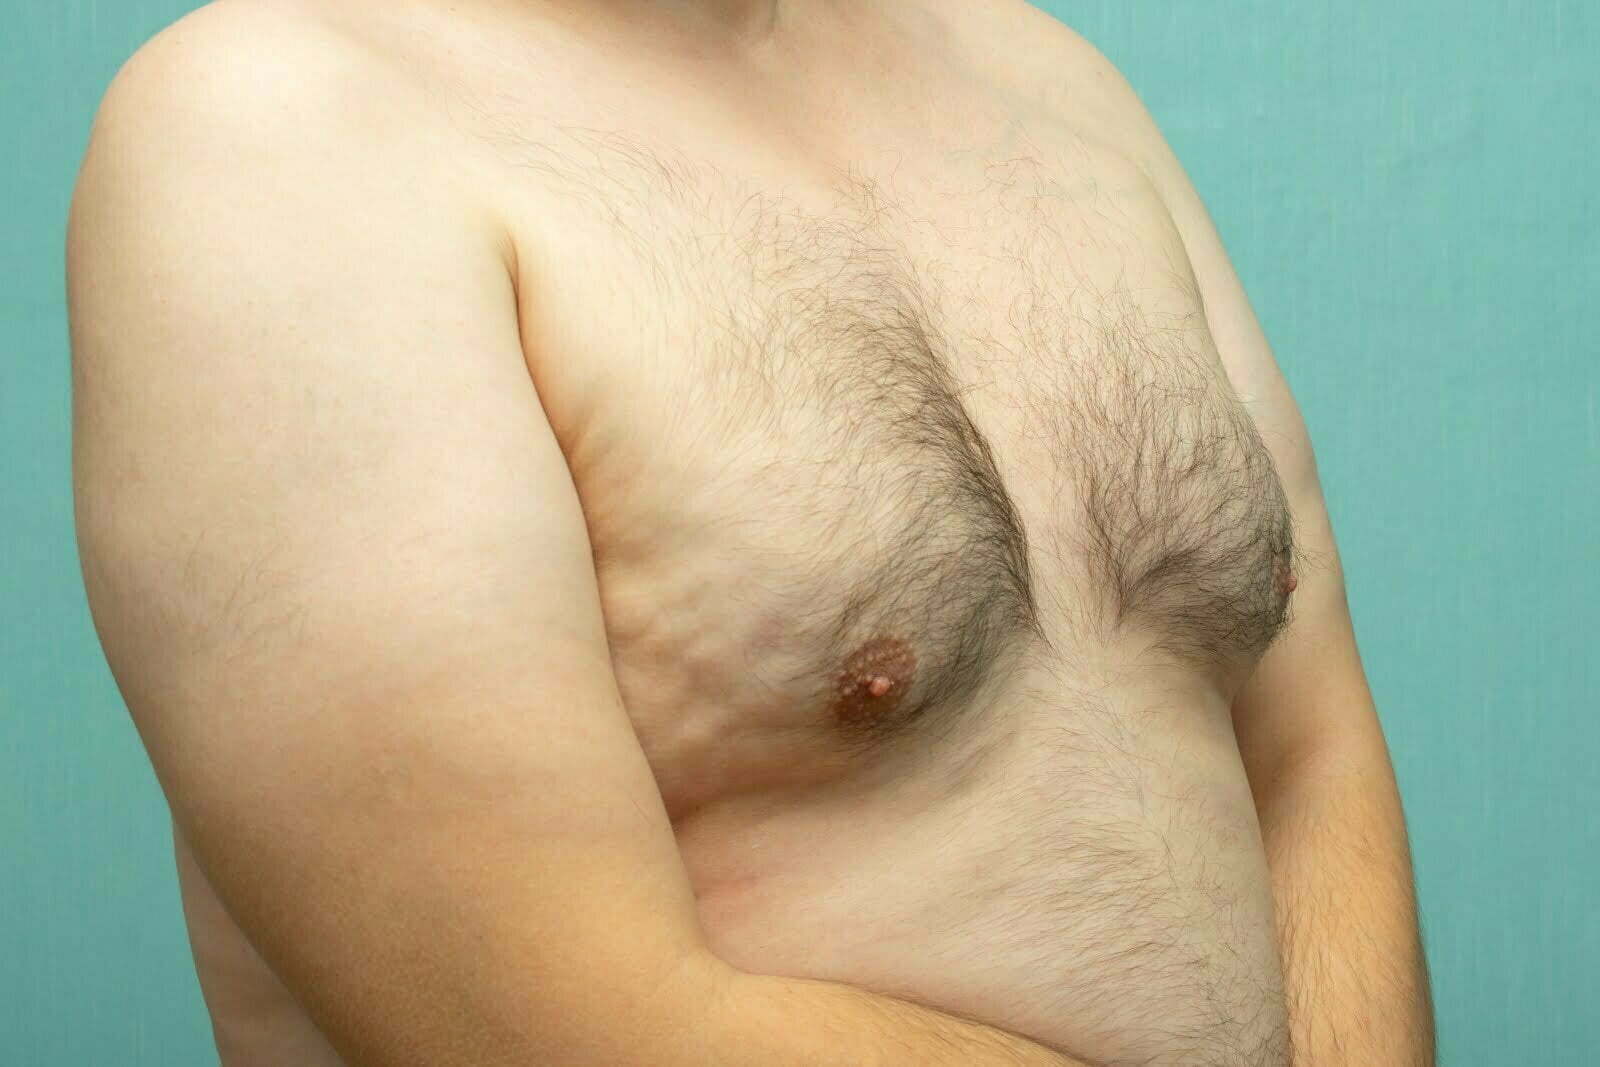 Is this gynecomastia? Please look closely and you will see my left breast  is bigger than the right. Any advice?? : r/gynecomastia